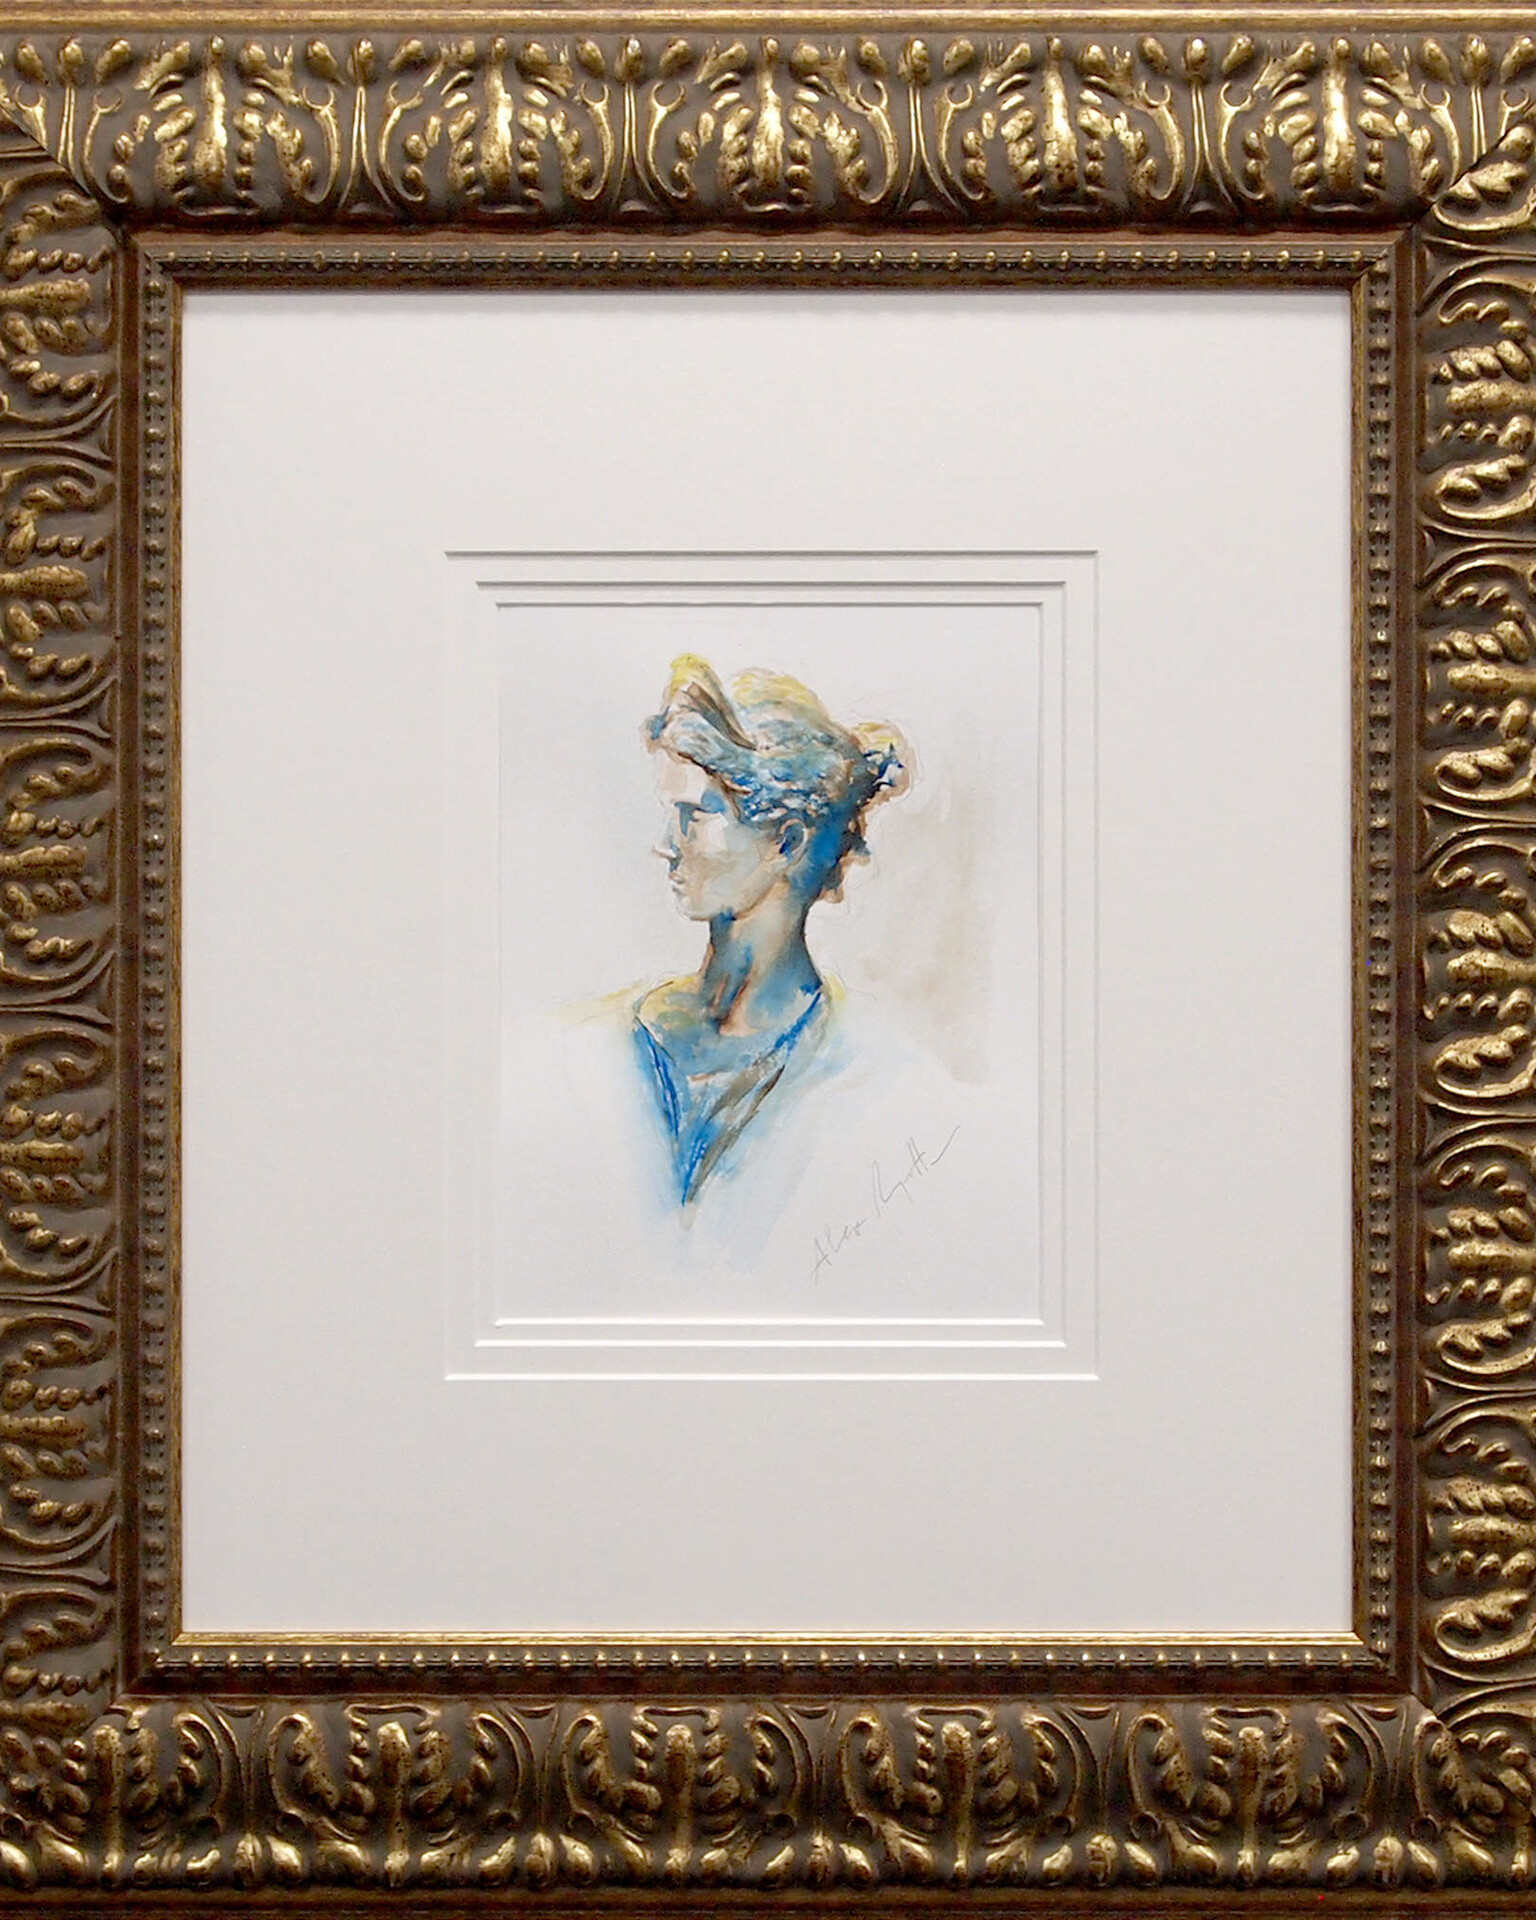 Abstract watercolor portrait of a woman, titled 'Gabriella' by Alex Righetto, framed in gold leaf